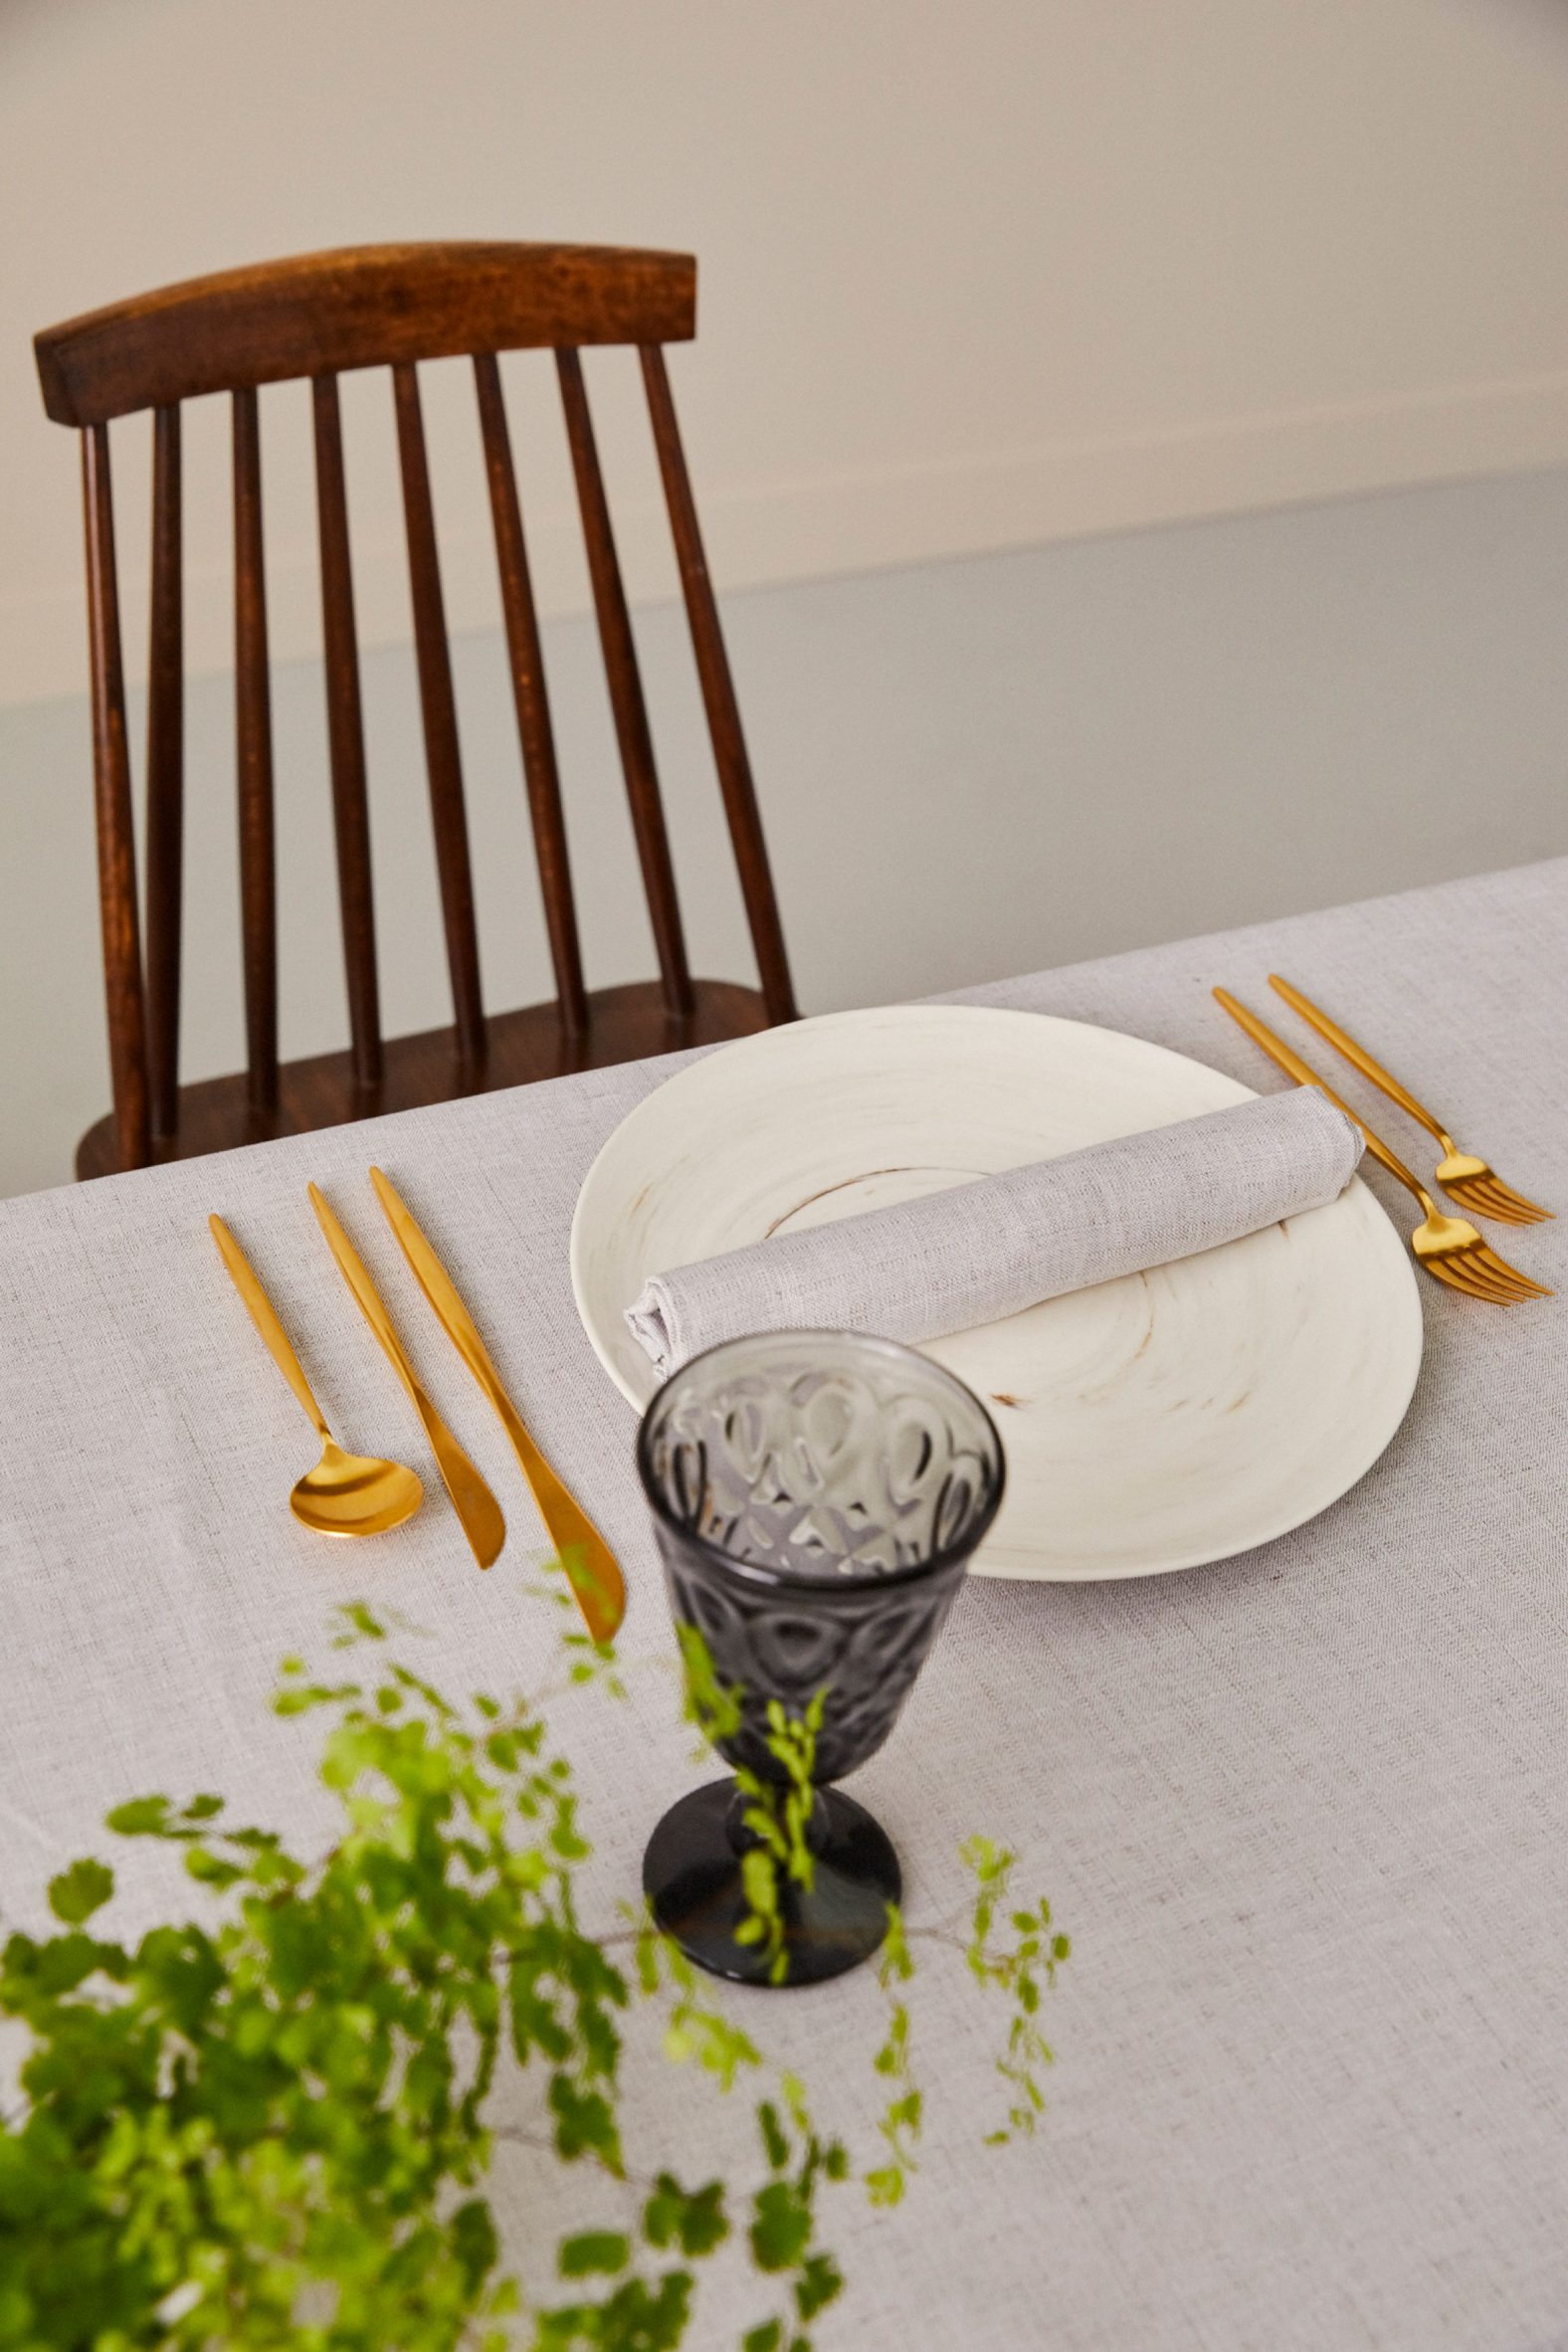 Photograph of place setting on table